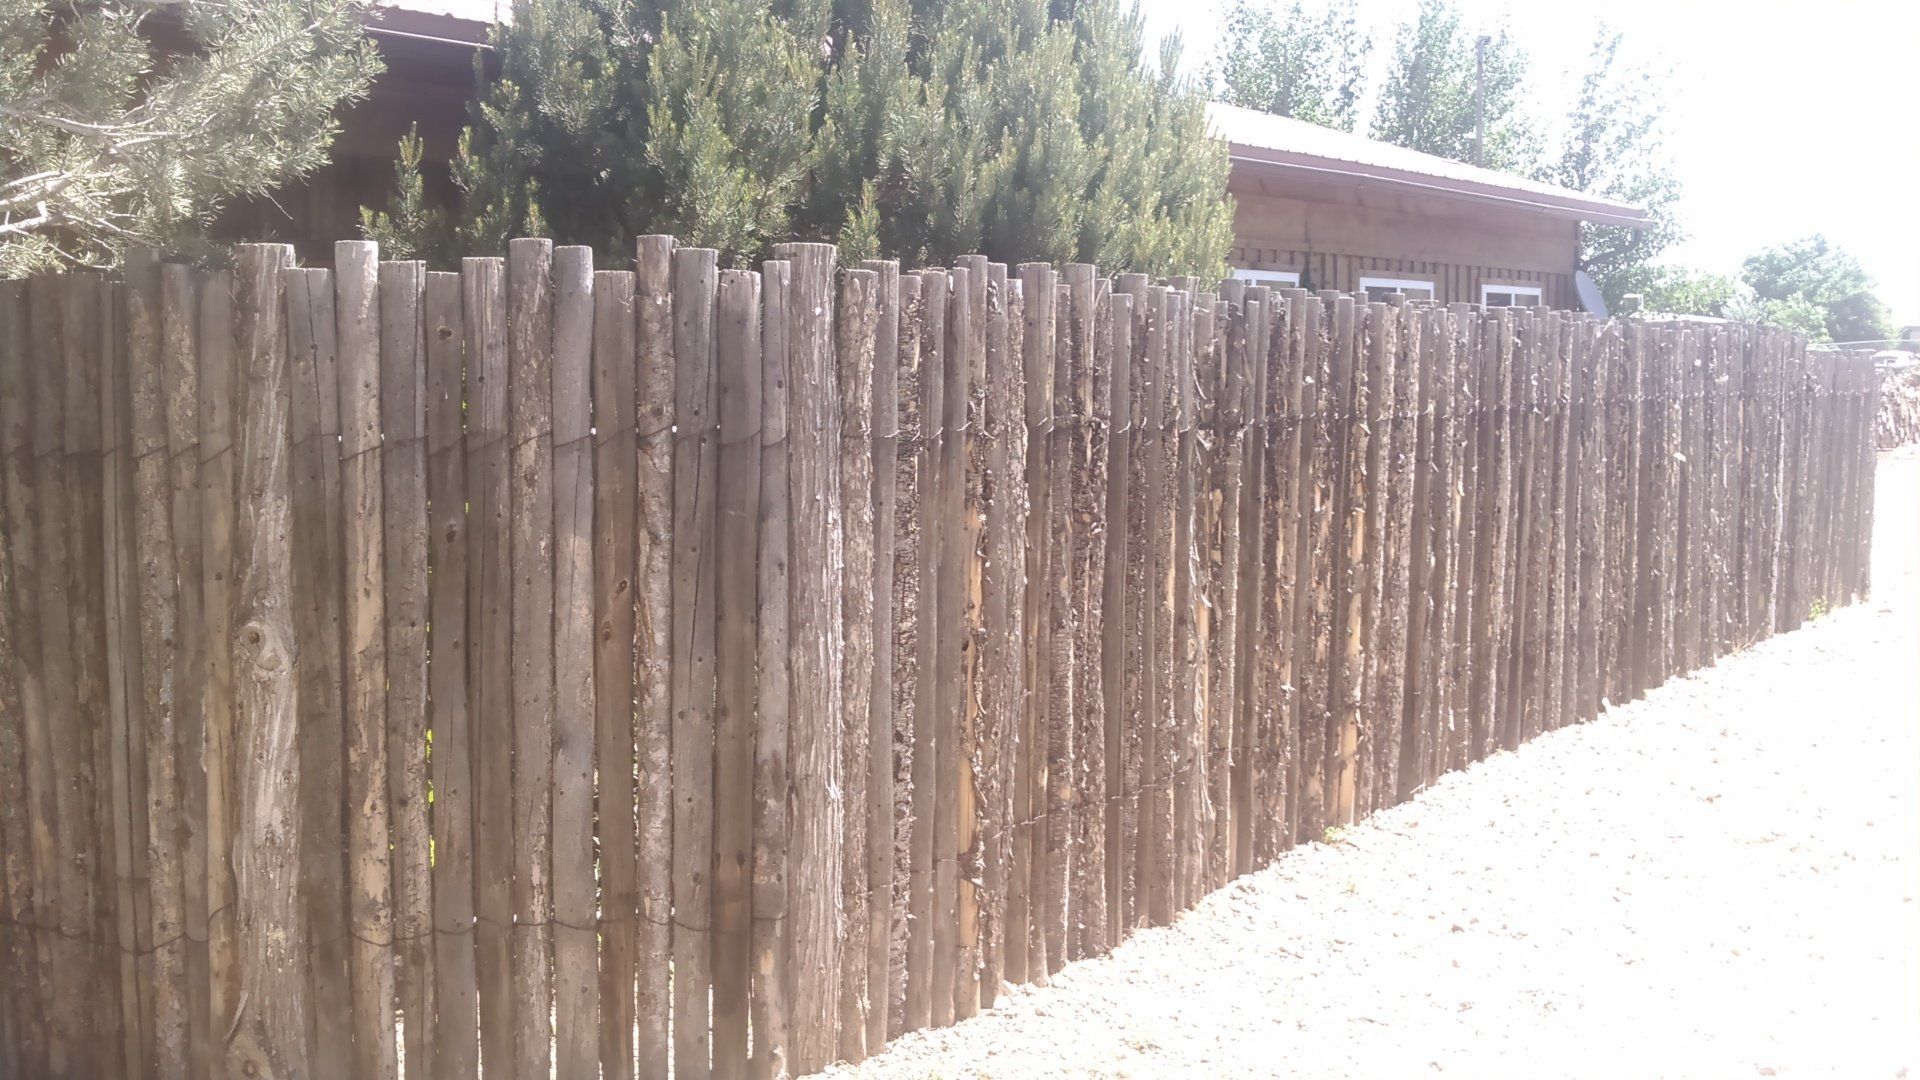 Coyote fencing with uneven edges - Coyote Fencing in Santa Fe NM